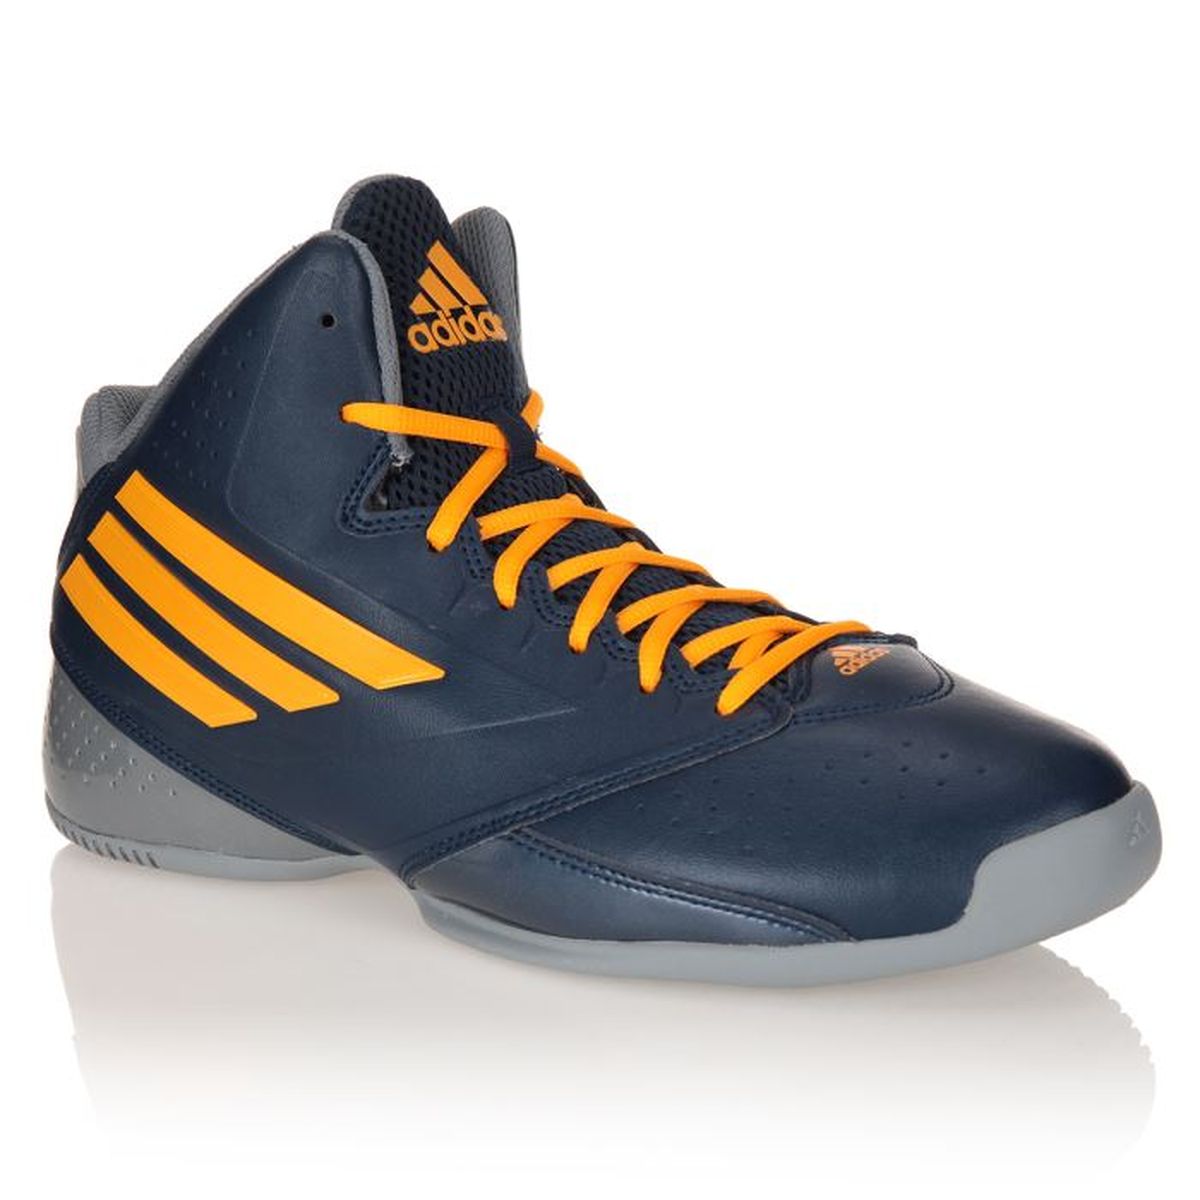 adidas chaussures basket 3 series homme